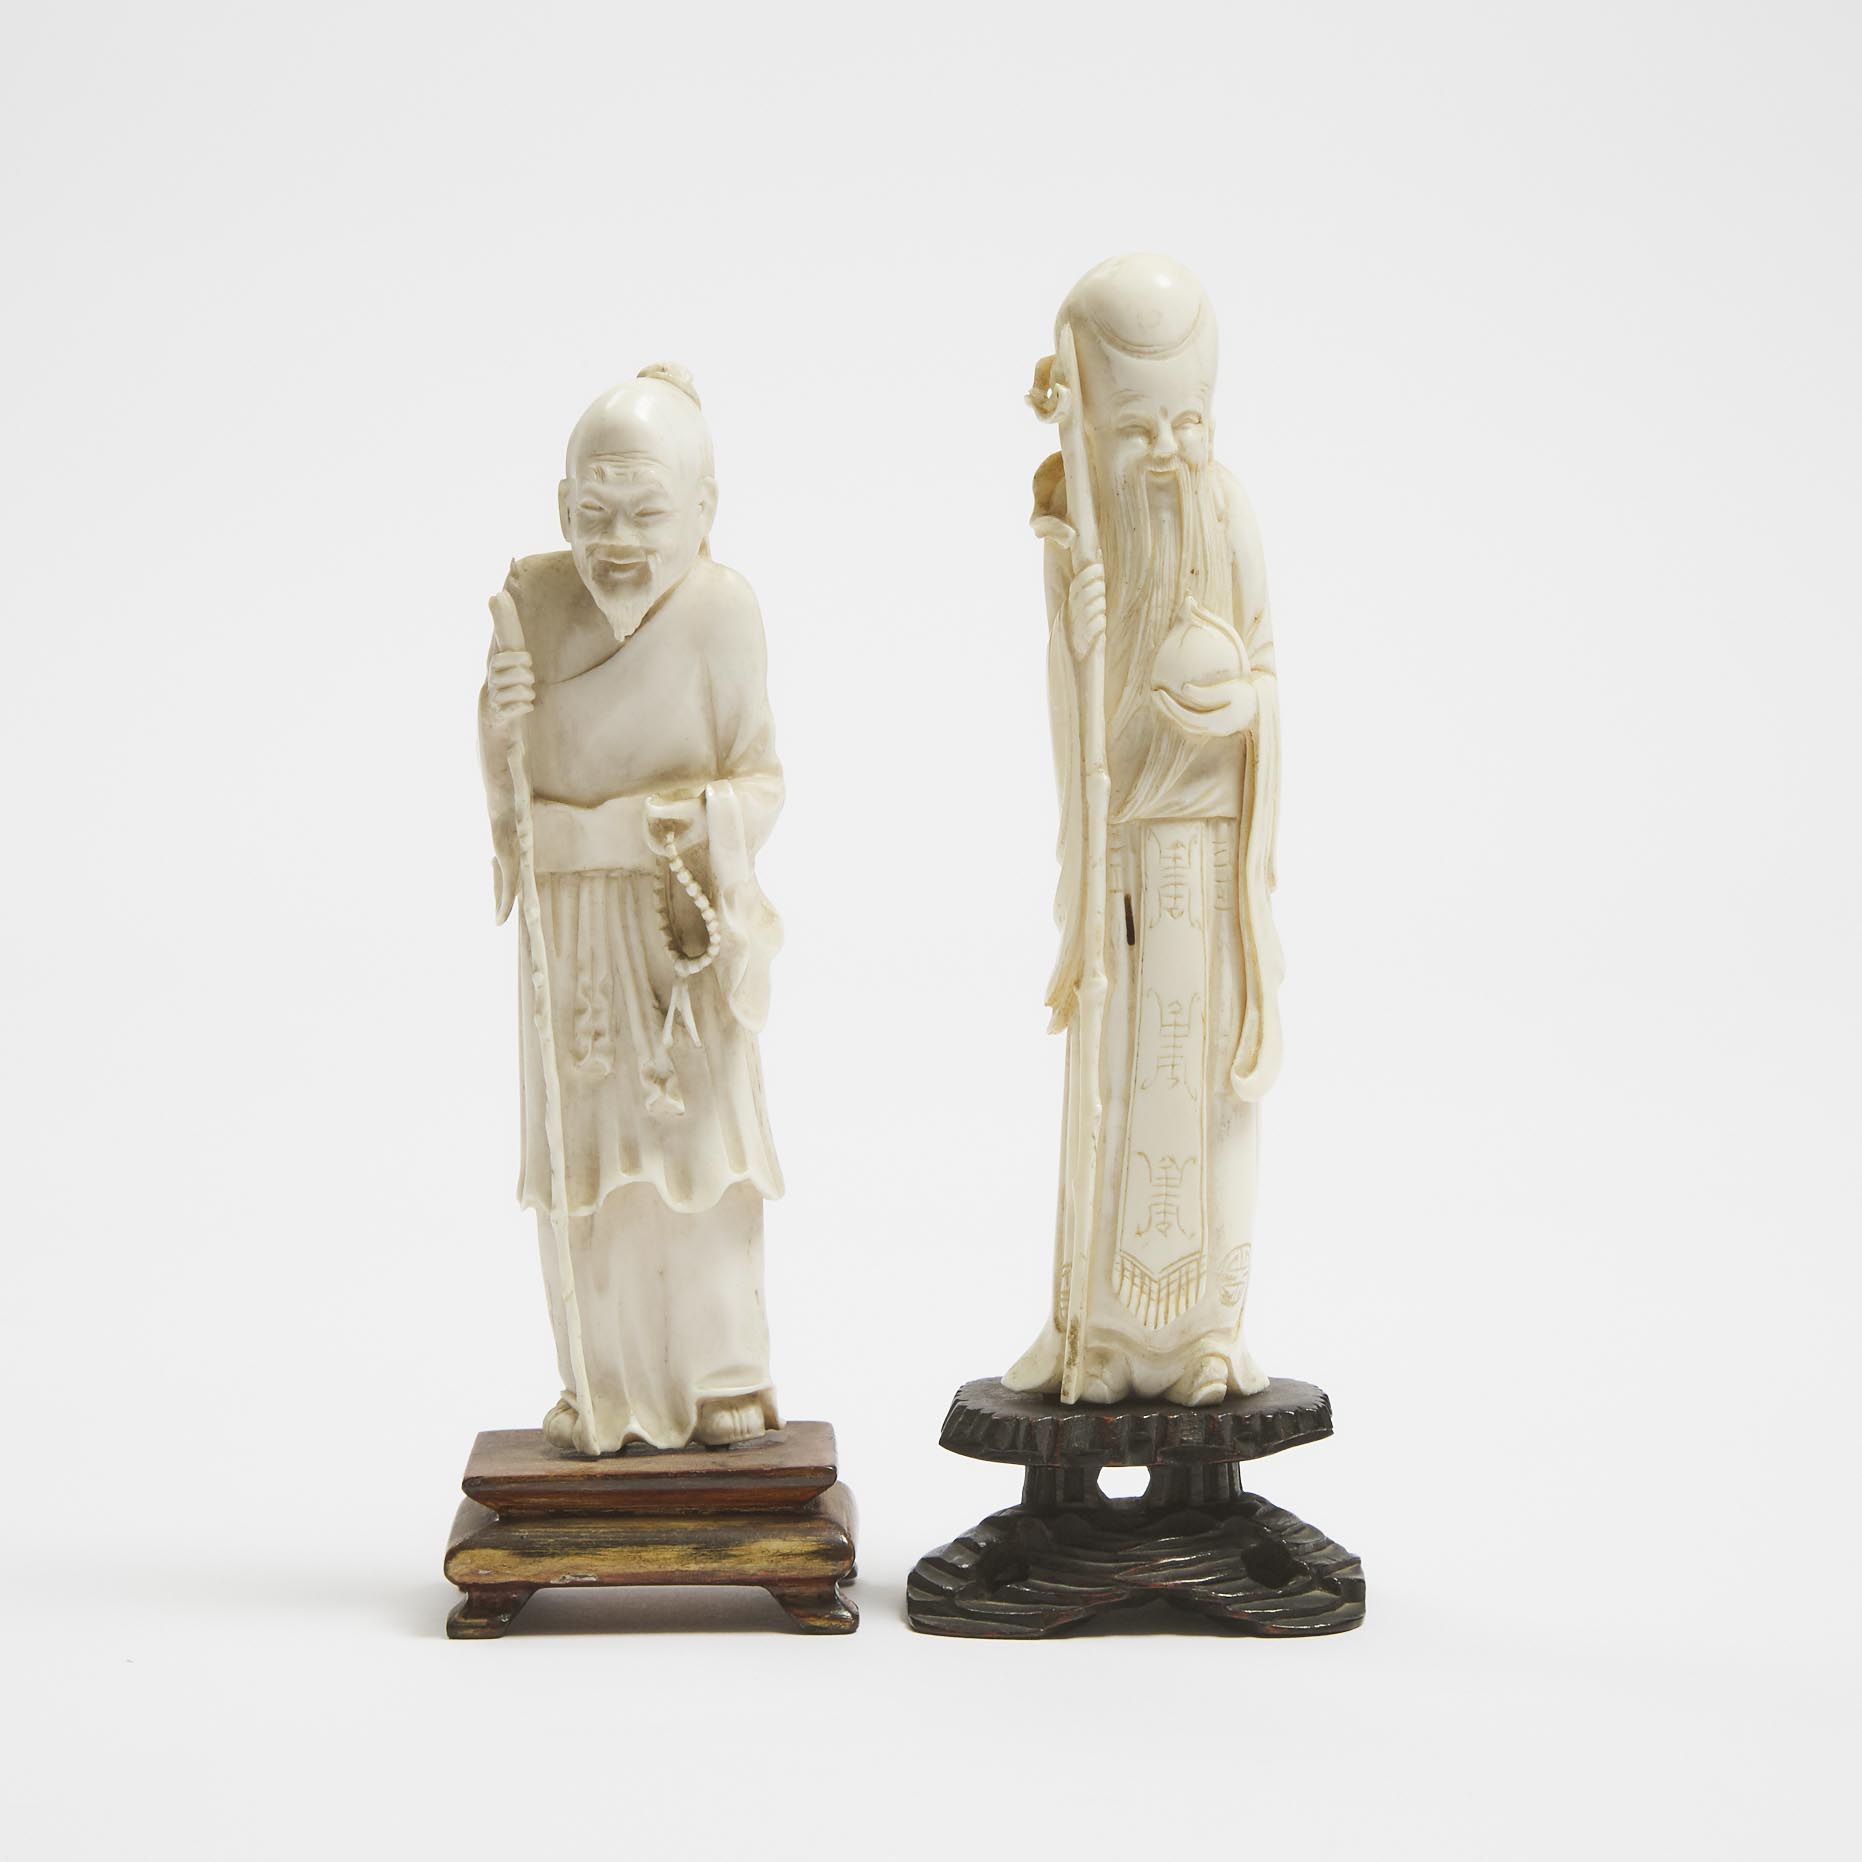 Two Chinese Carved Ivory Figures of Shoulao and an Immortal